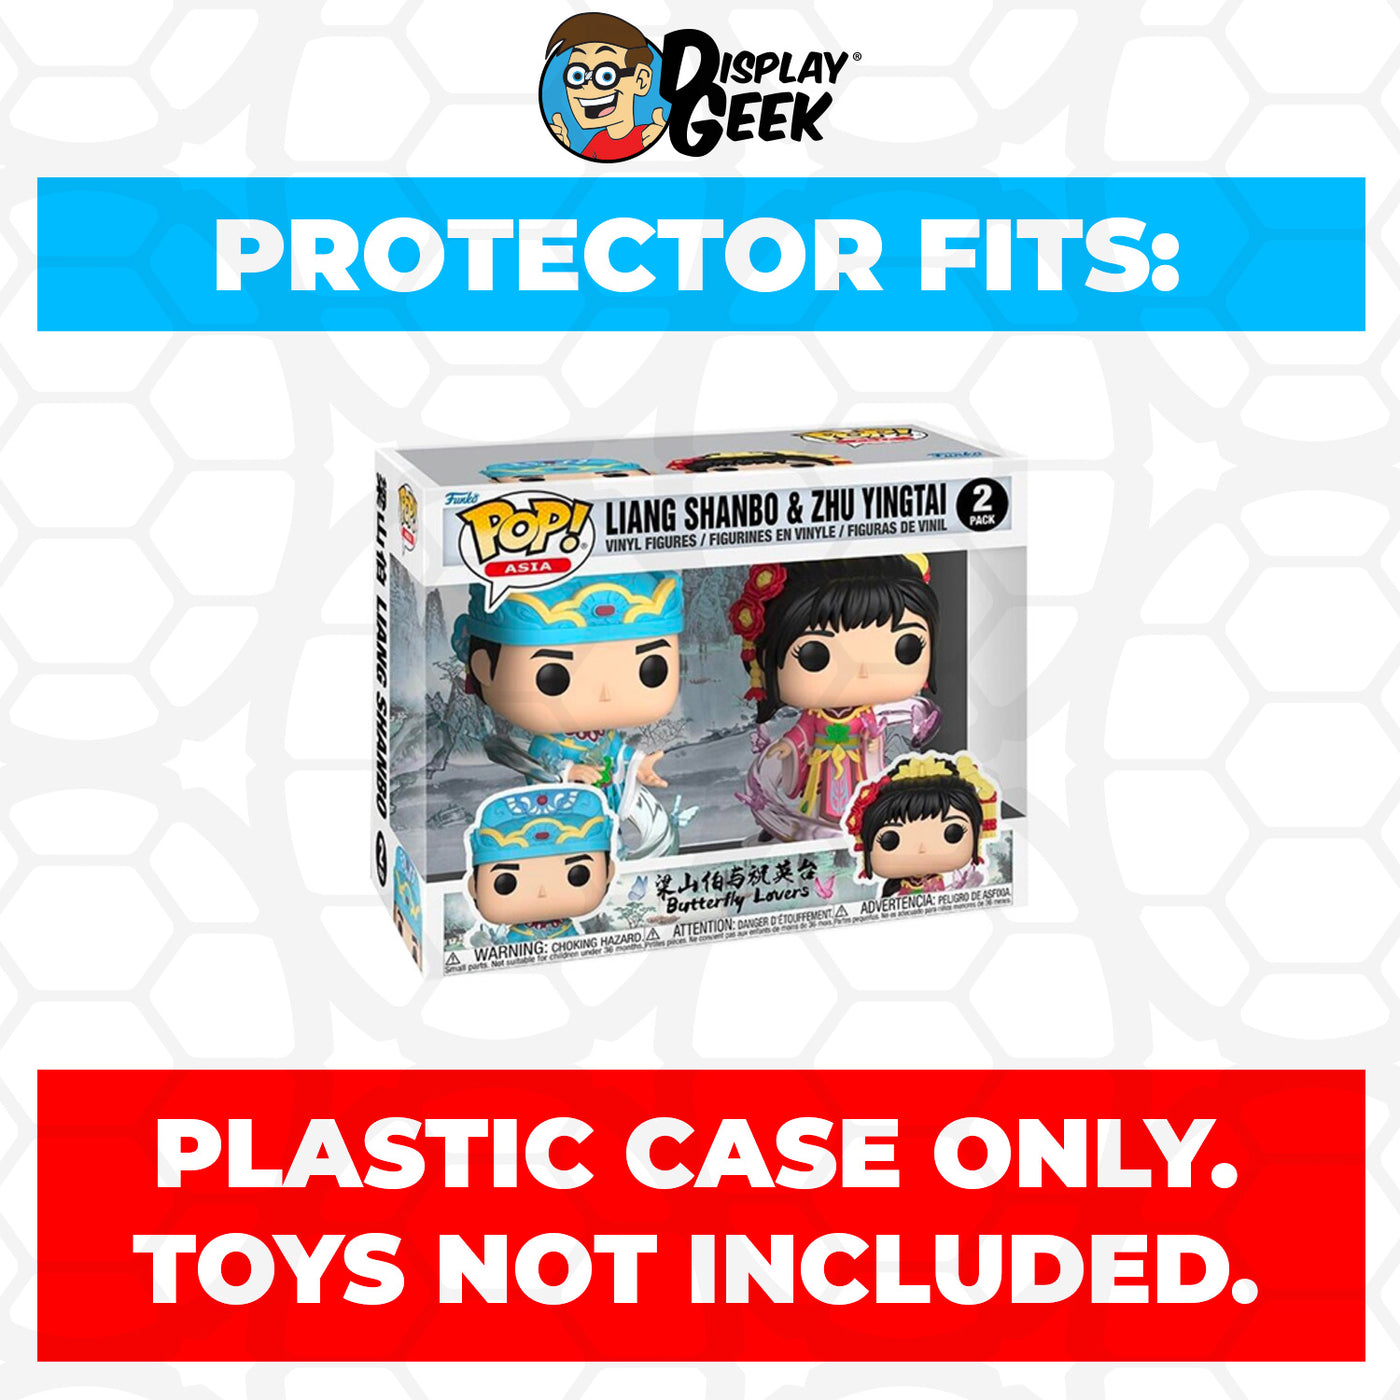 Pop Protector for 2 Pack Liang Shanbo & Zhu Yingtai Funko Pop on The Protector Guide App by Display Geek